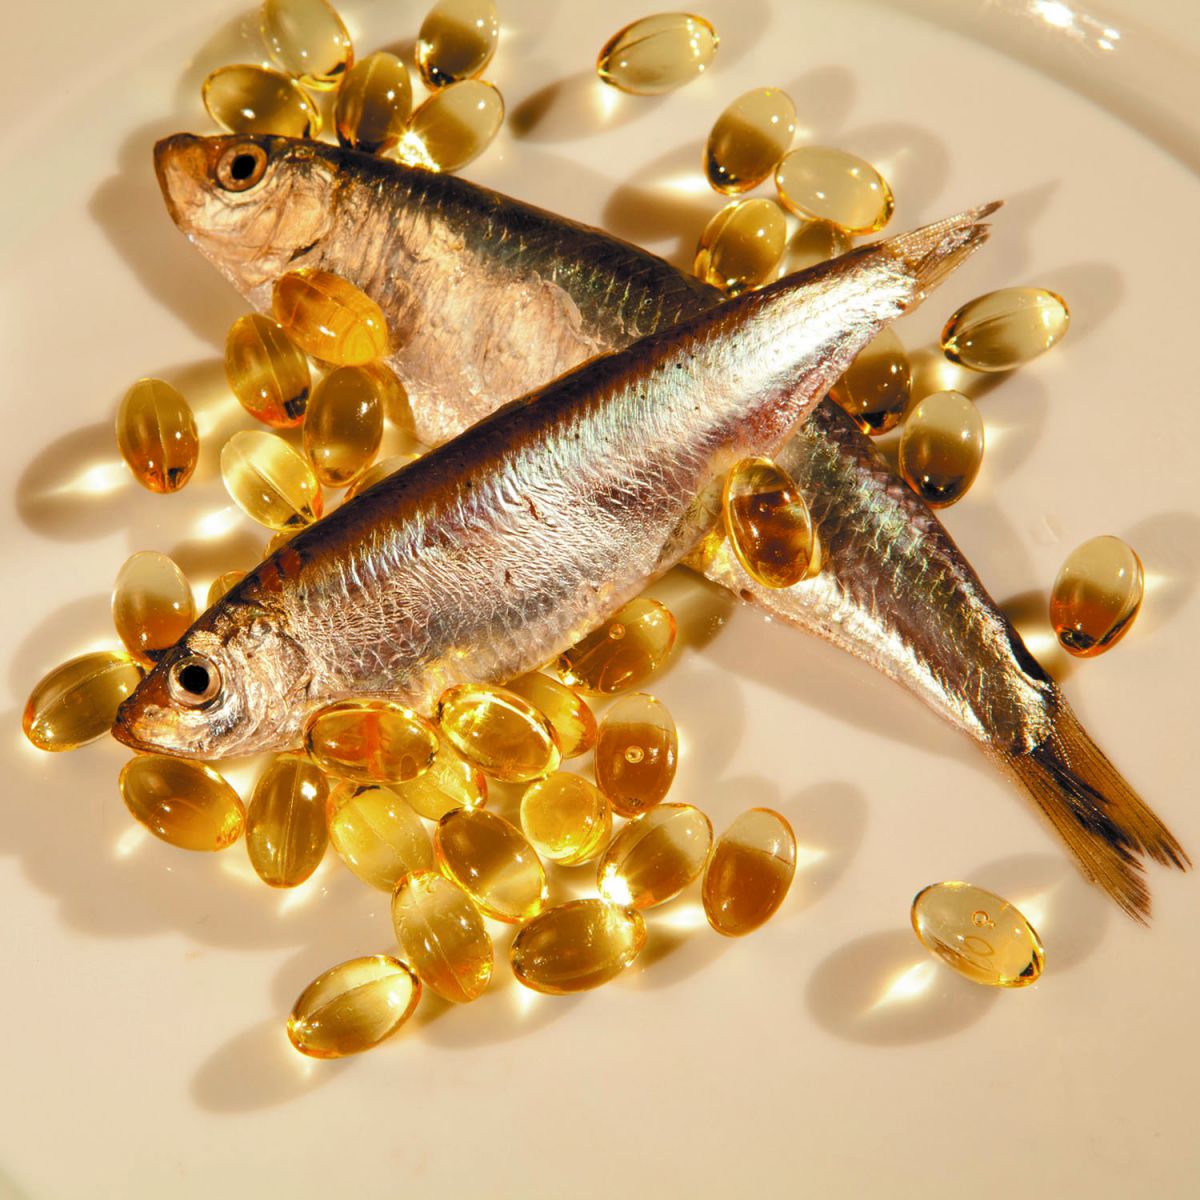 fish oil without gelatin